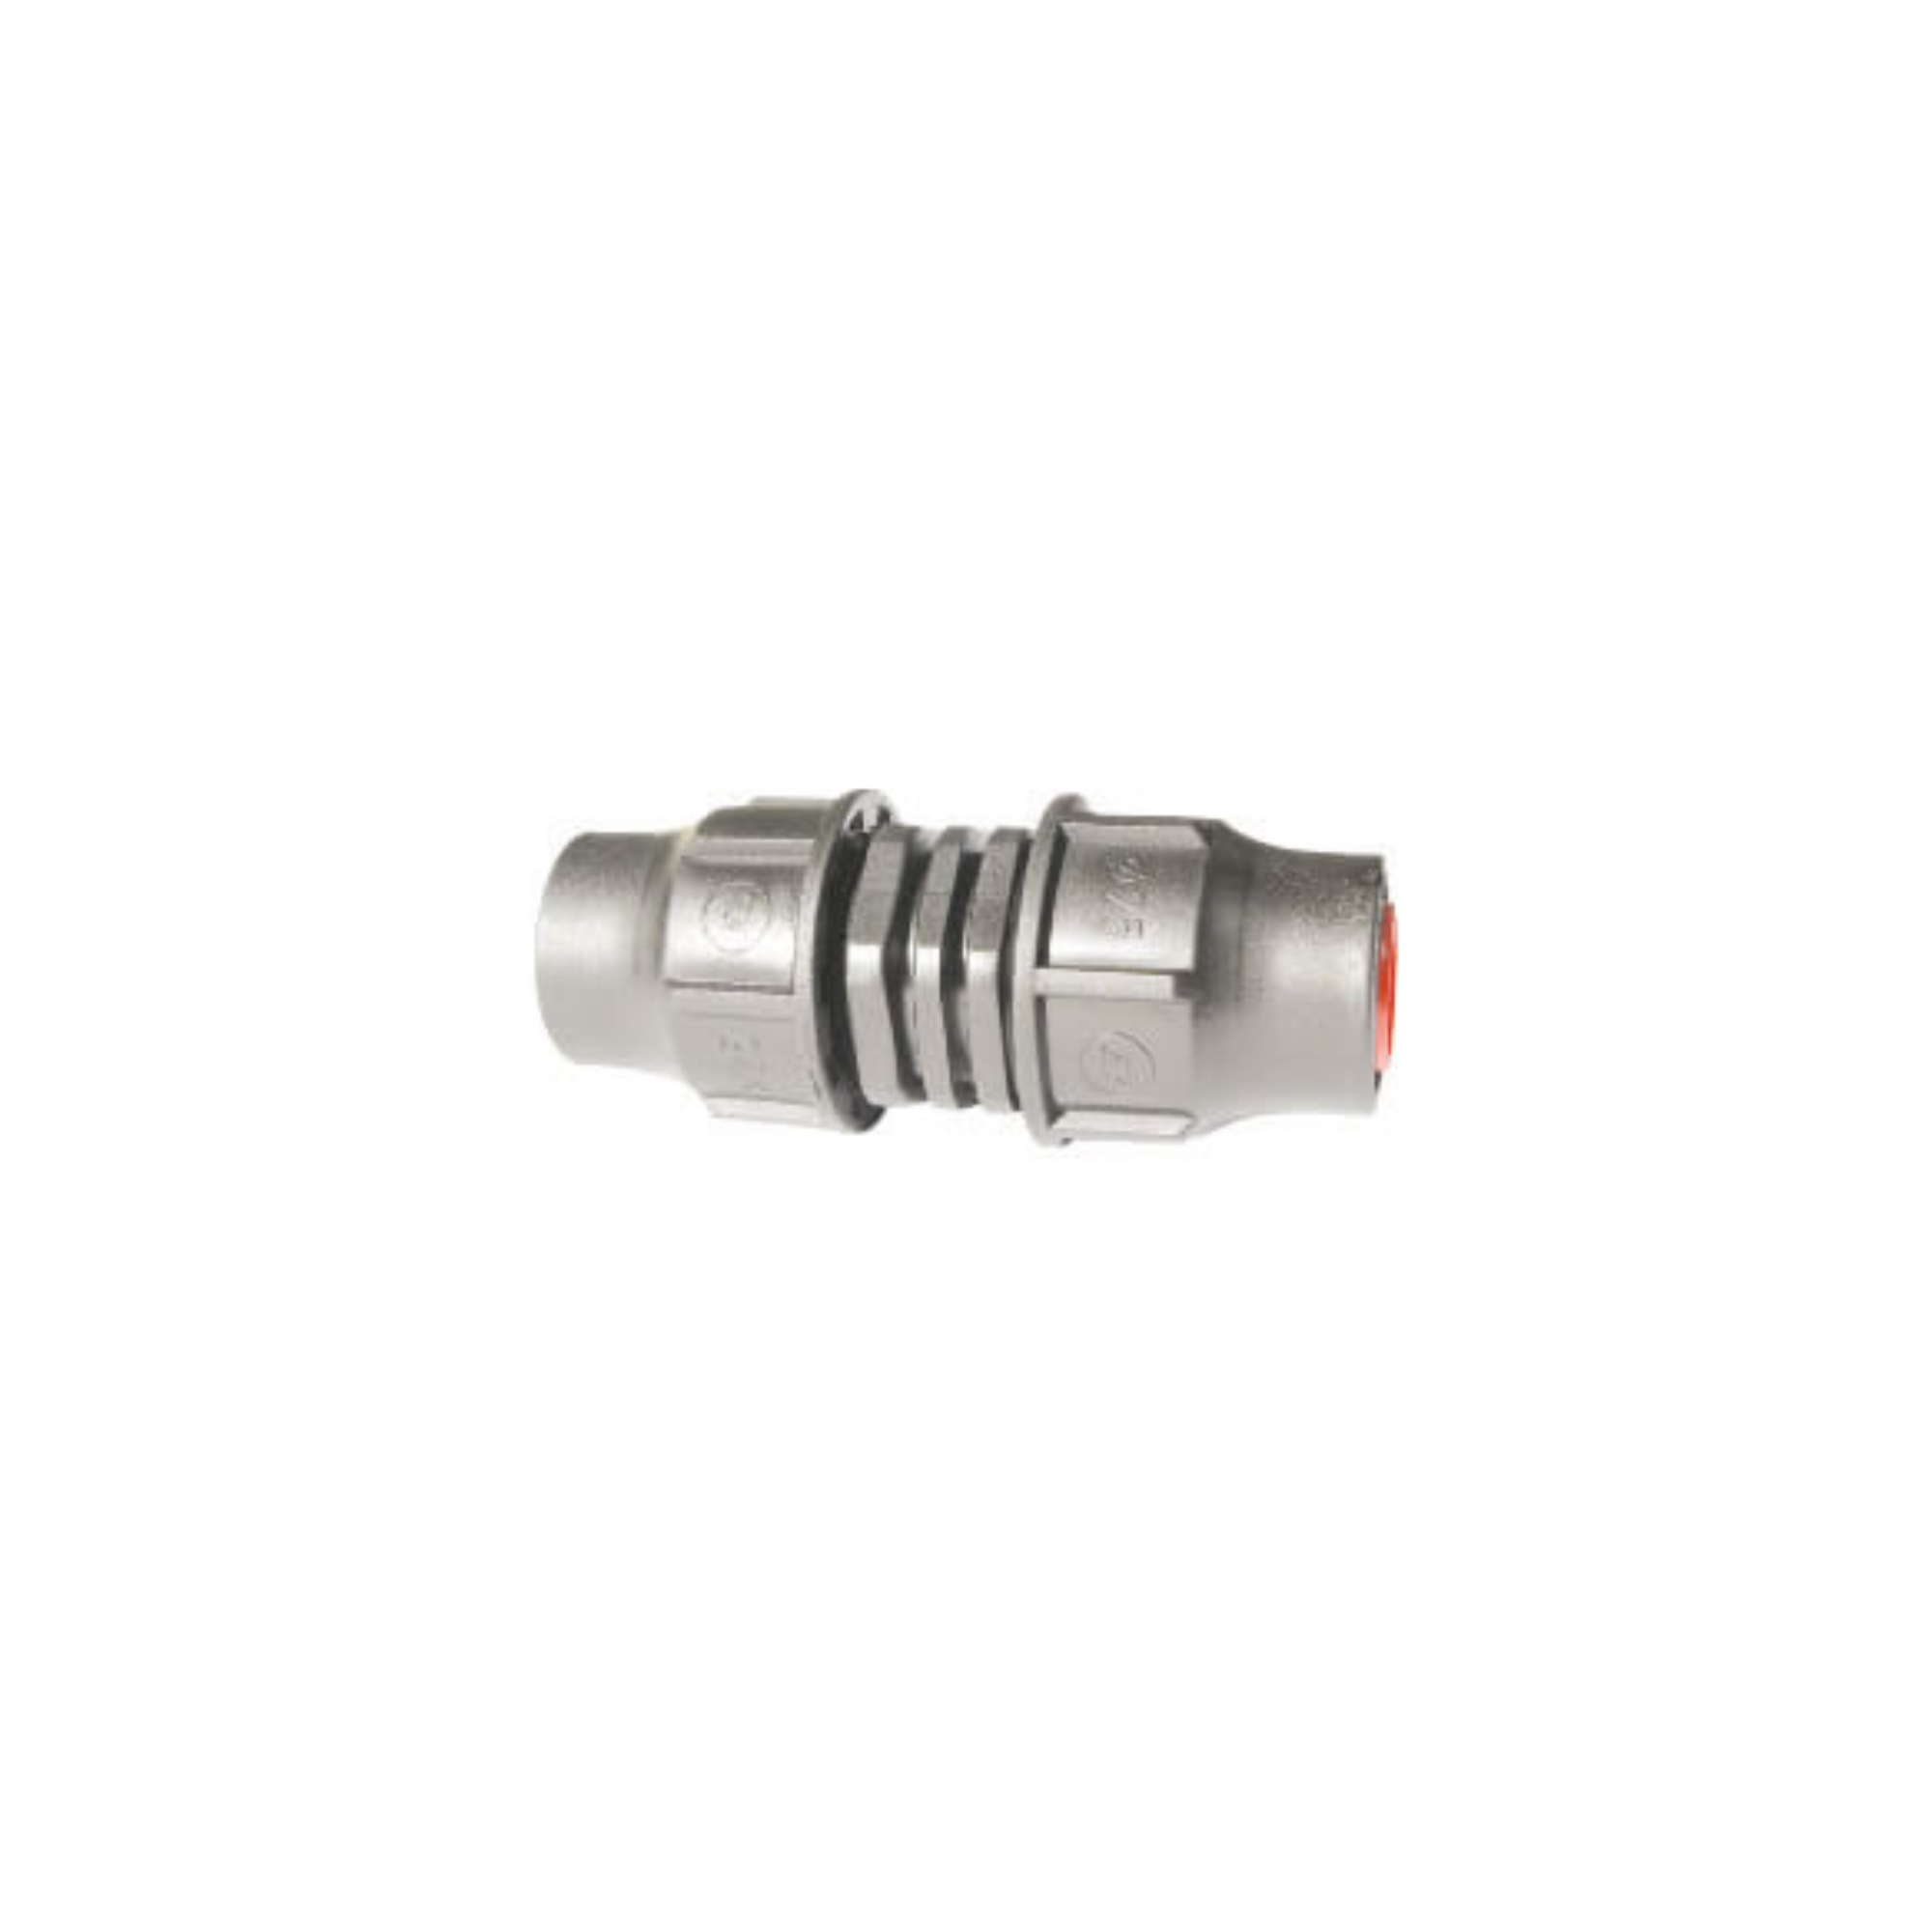 Lock Fittings for 20mm (17mm) LDPE Pipe